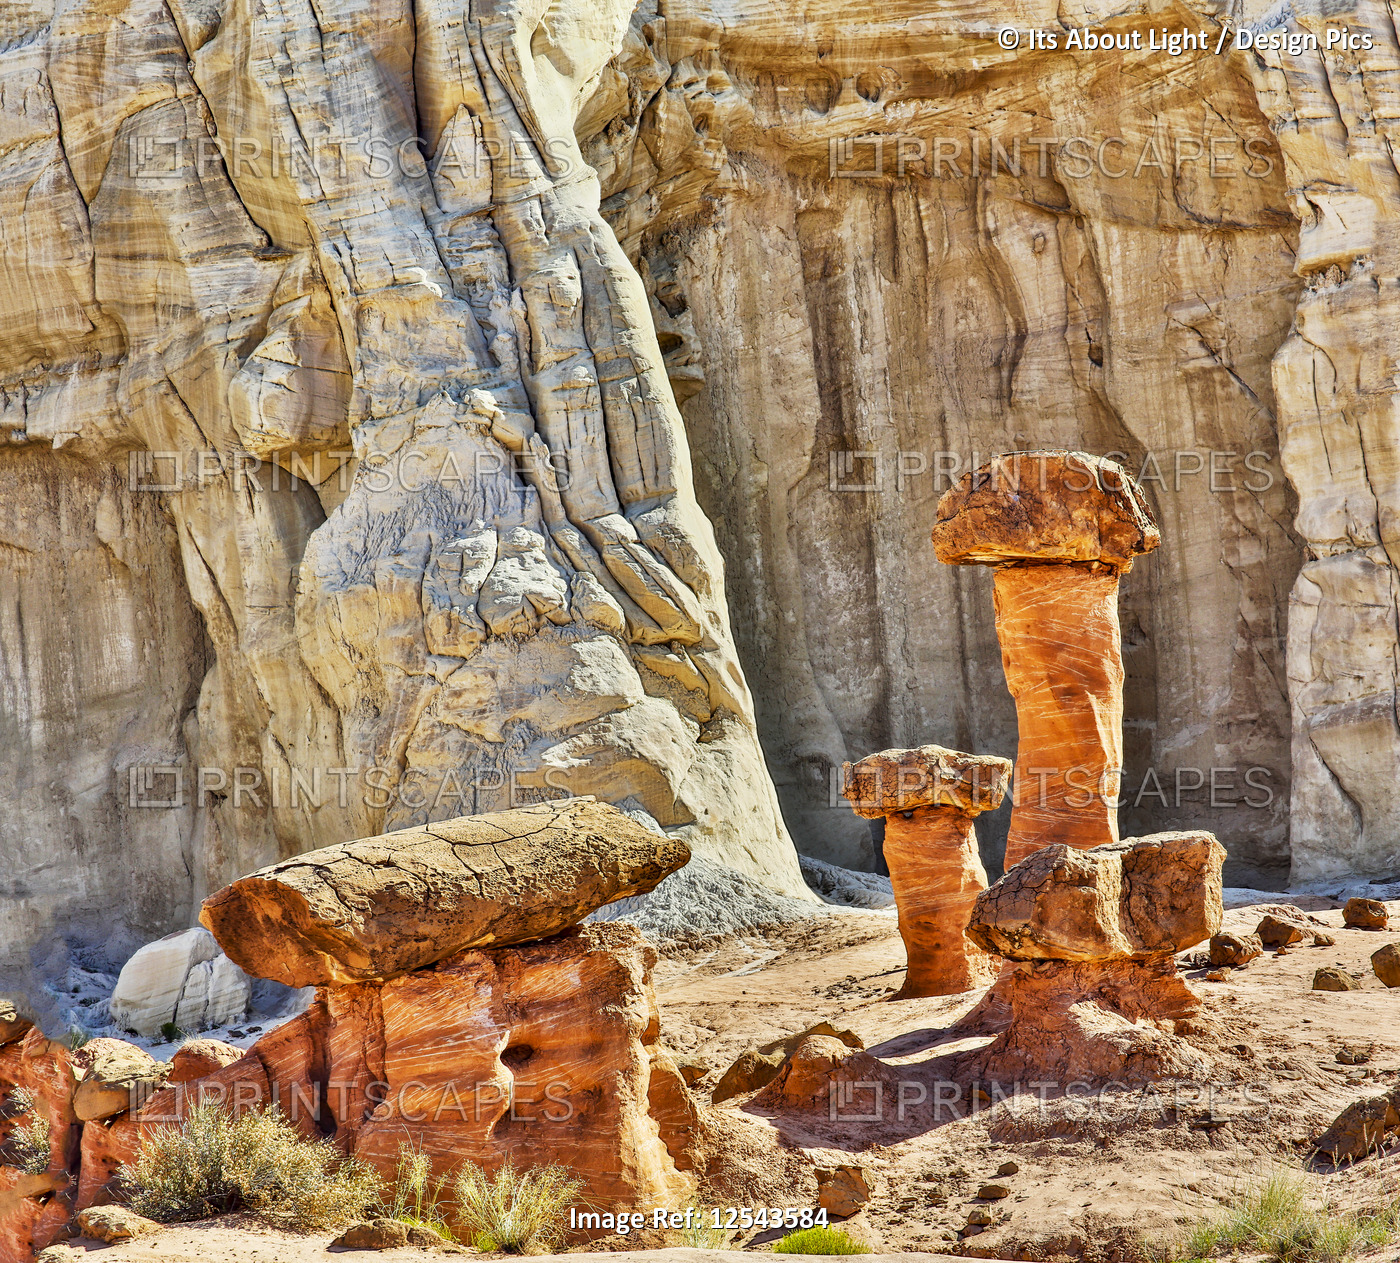 Grand Staircase-Escalante National Monument; Utah, United States of America